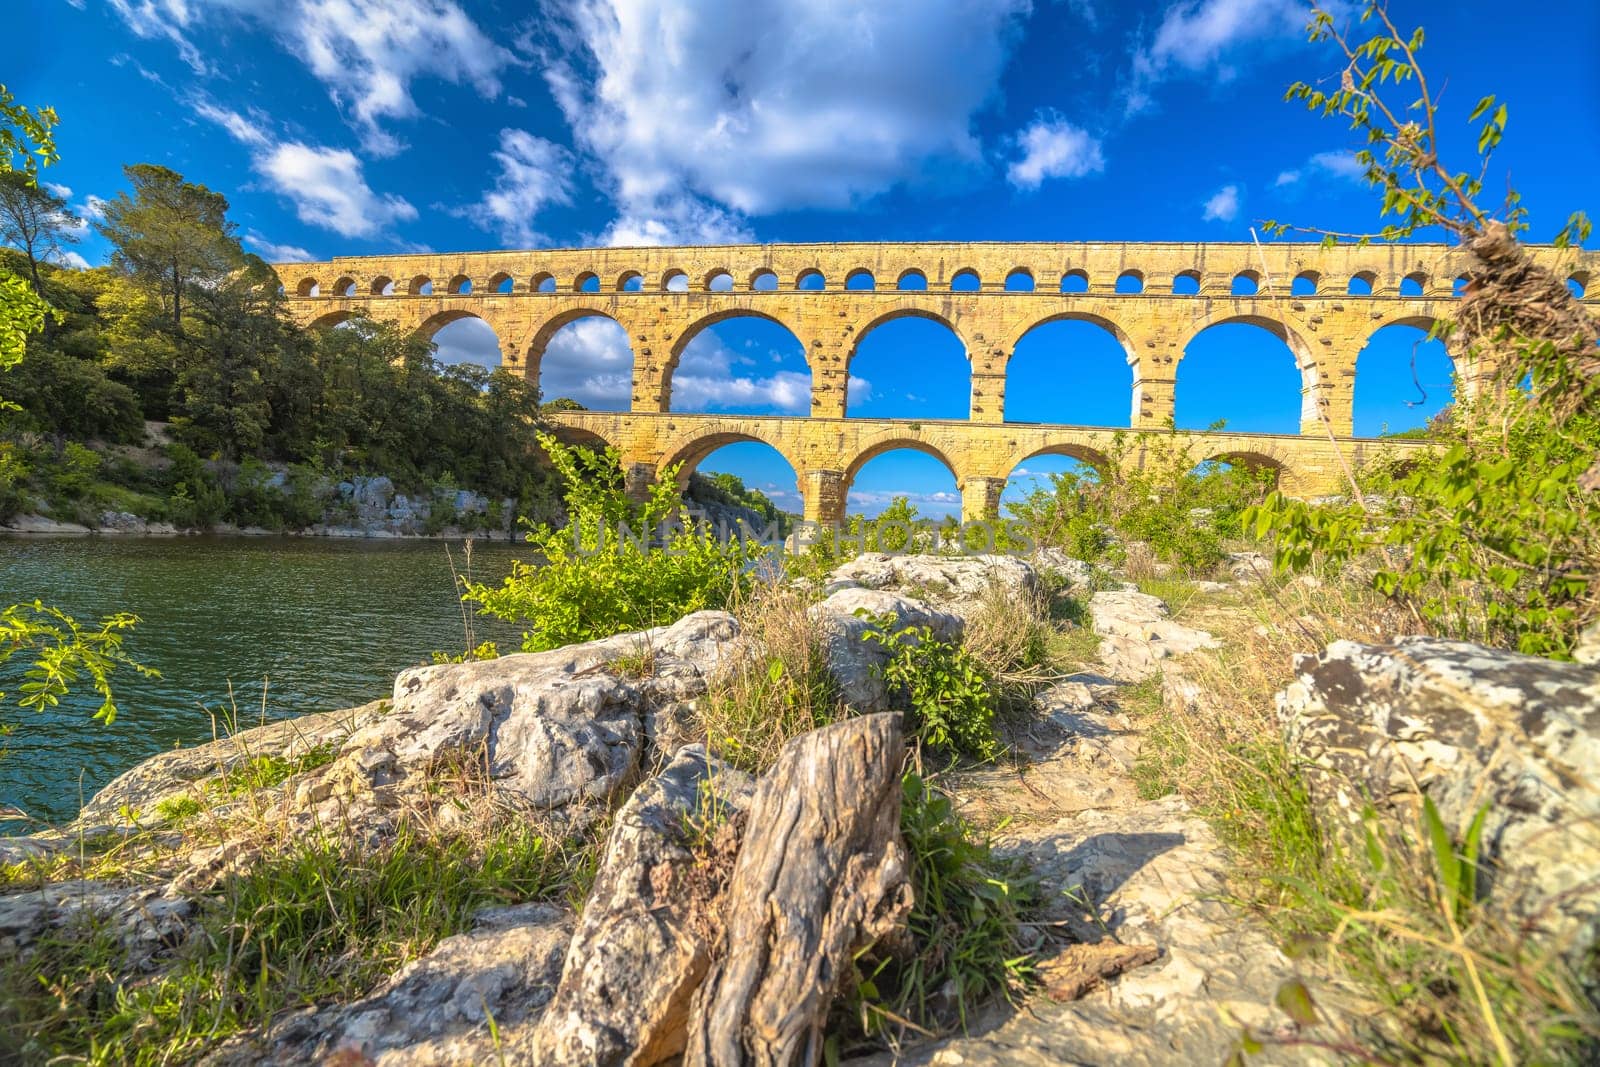 The Pont du Gard ancient Roman aqueduct bridge built in the first century AD to carry water to Nîmes. It crosses the river Gardon near the town of Vers-Pont-du-Gard in southern France.